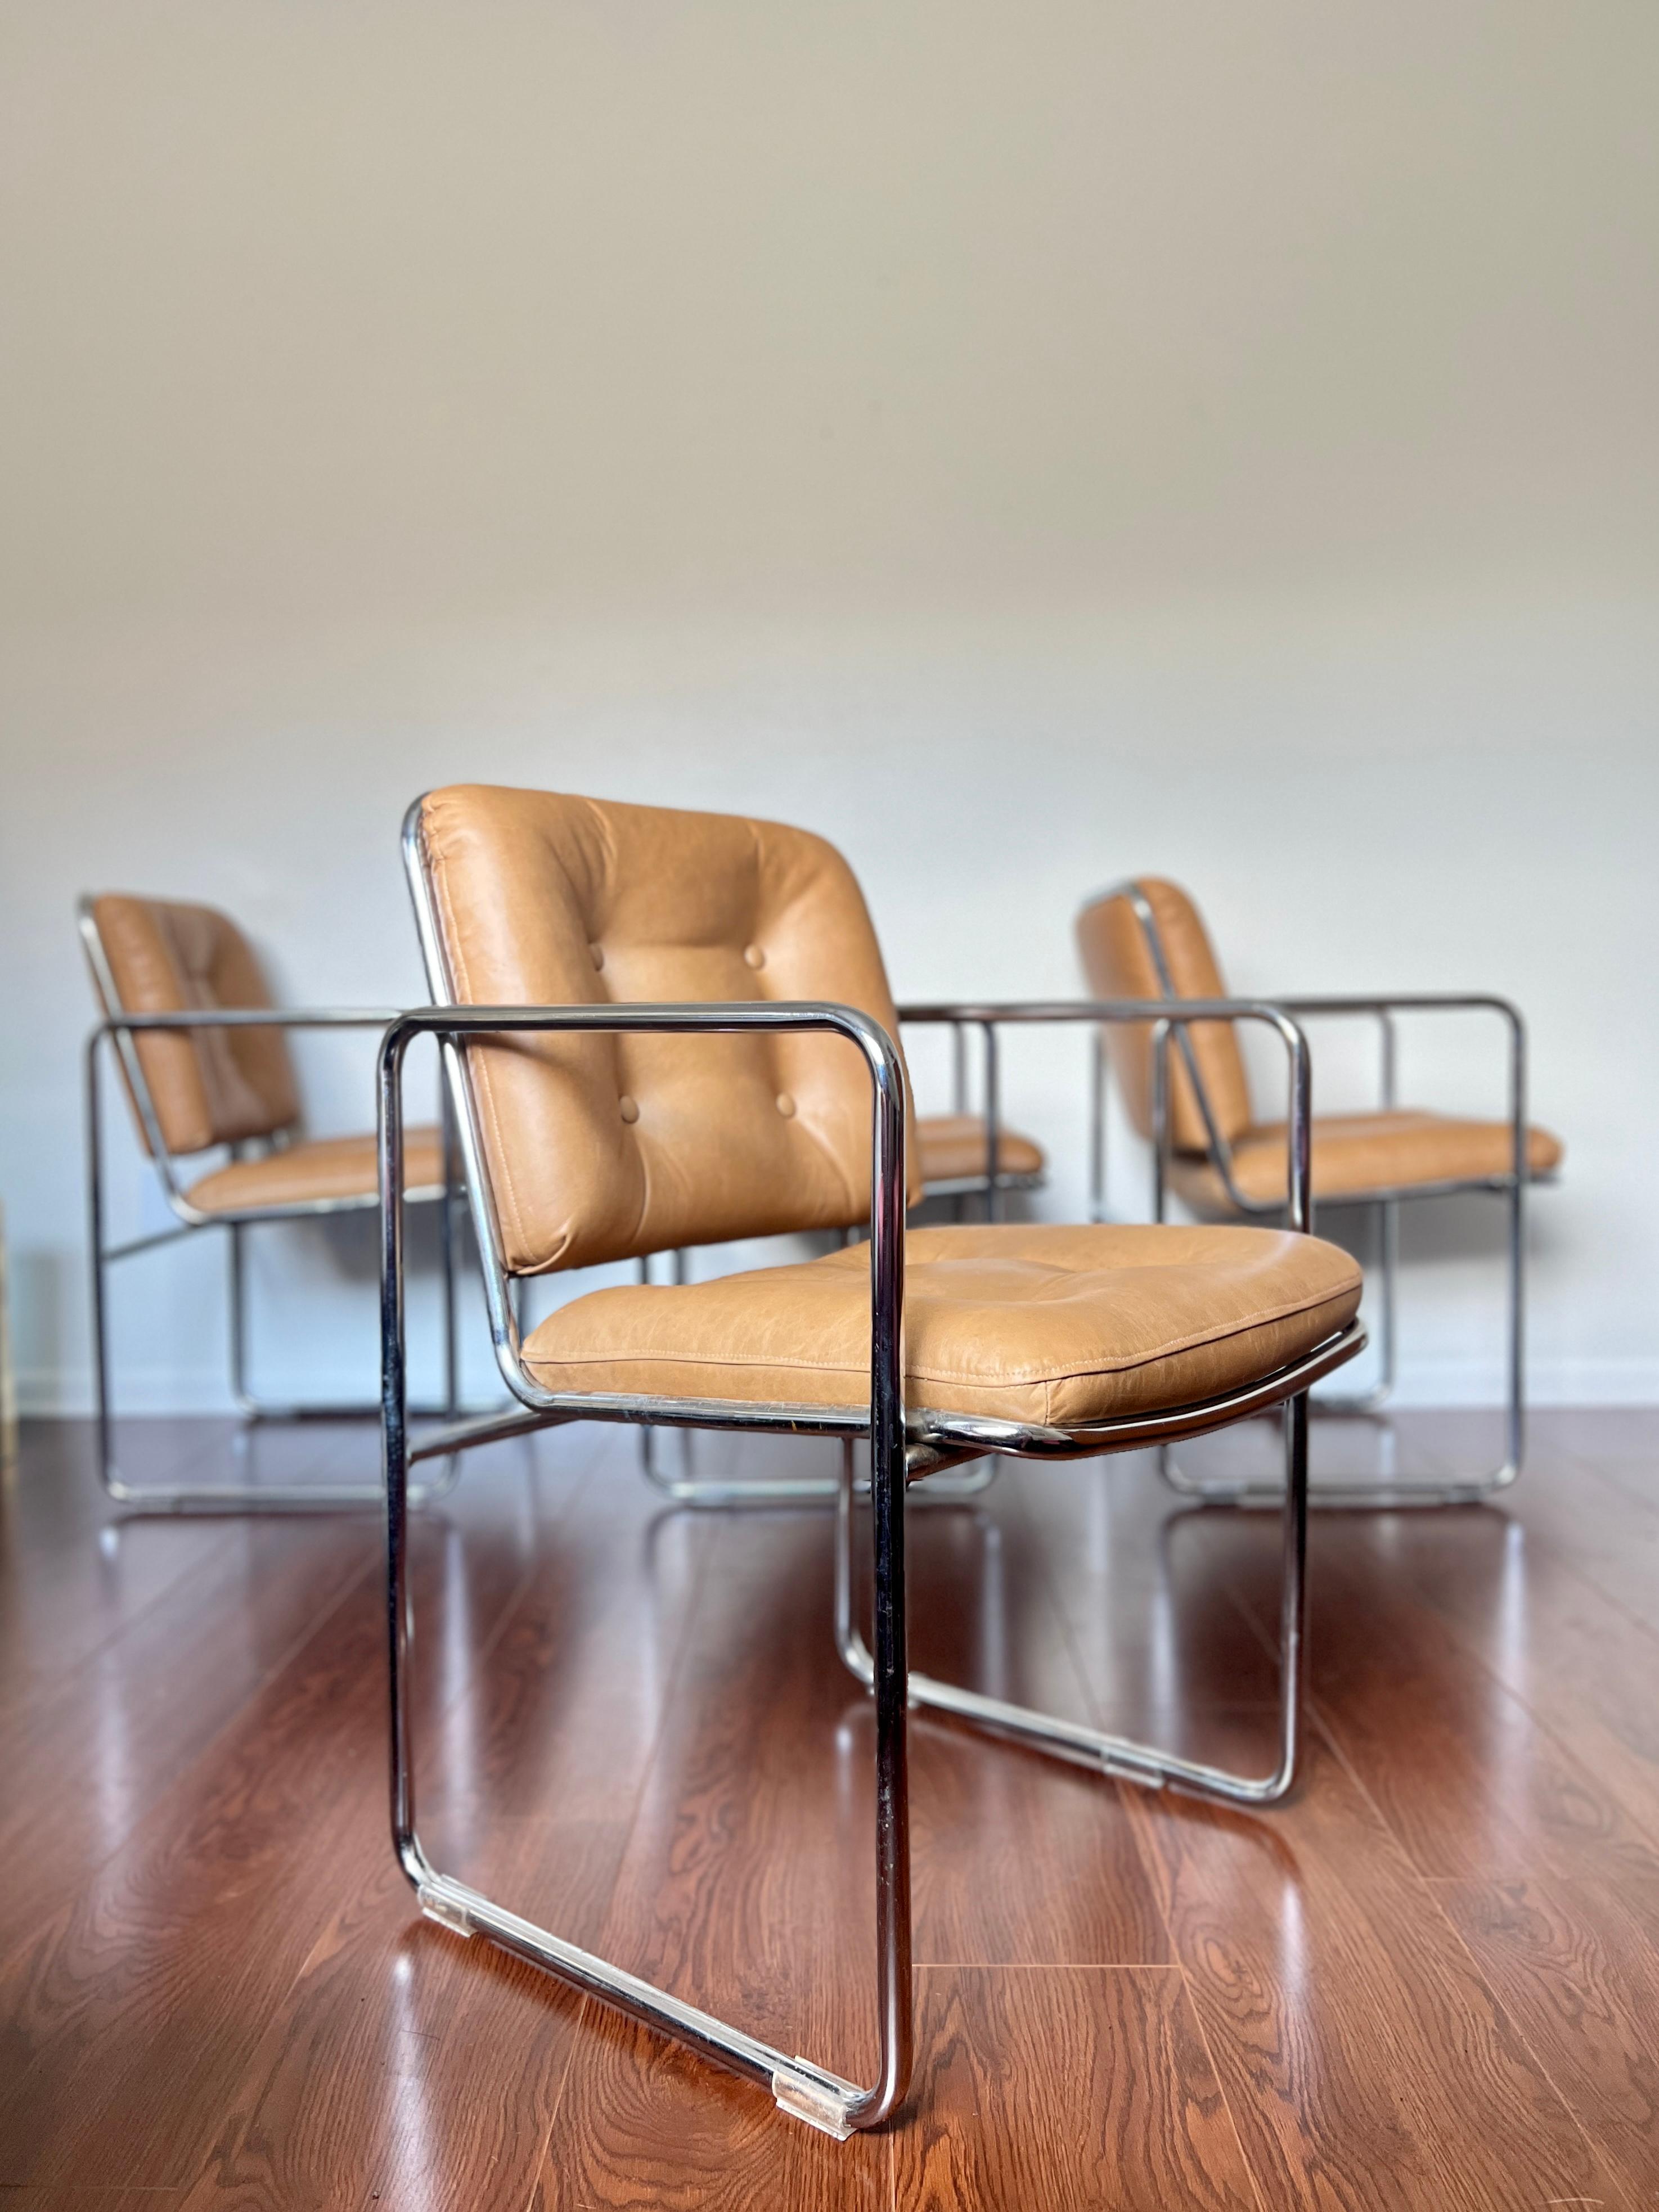 Vintage 1960s Mid-Century Modern chrome tubular chairs by Chromcast. Newly reupholstered in a buttery high quality cowhide leather in a saddle tan brown color. Overall, In excellent condition. 

Leather specs:
-Type: Distressed Top Grain
-